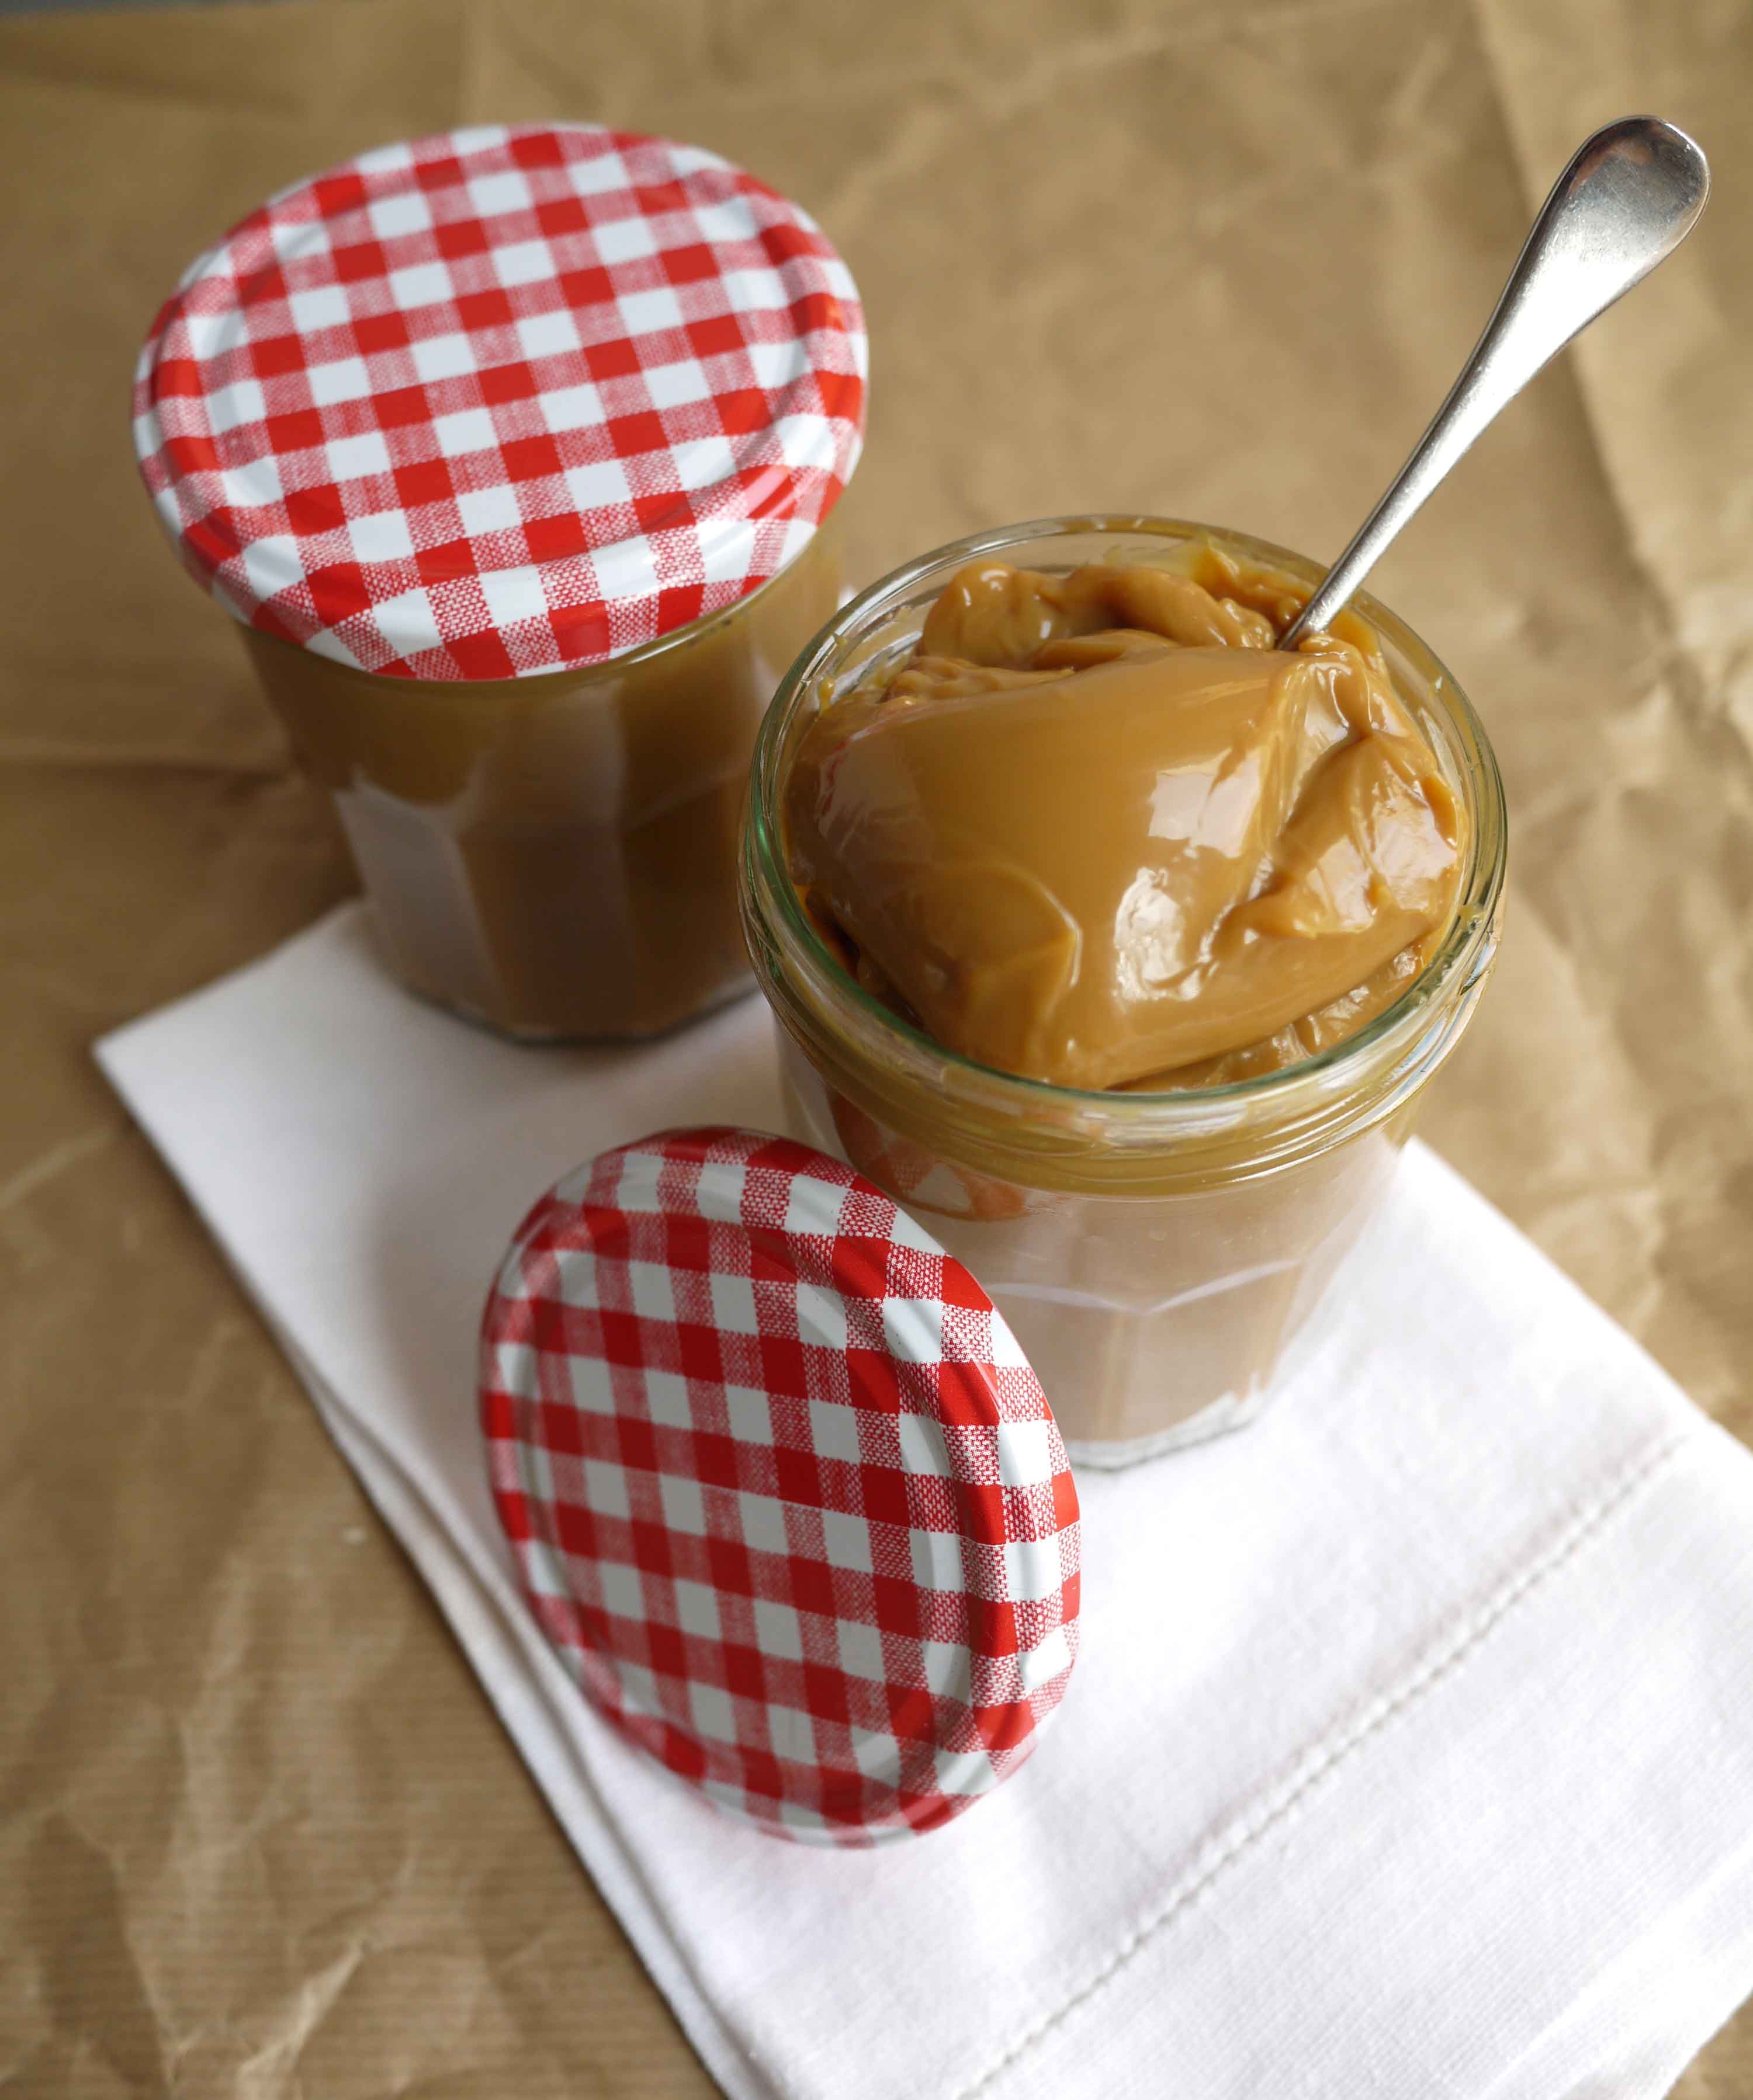 The easiest ever slow cooker (crockpot) home made condensed milk caramel sauce, made without cream or fuss. Perfectly smooth, not grainy, slow cooker caramel!